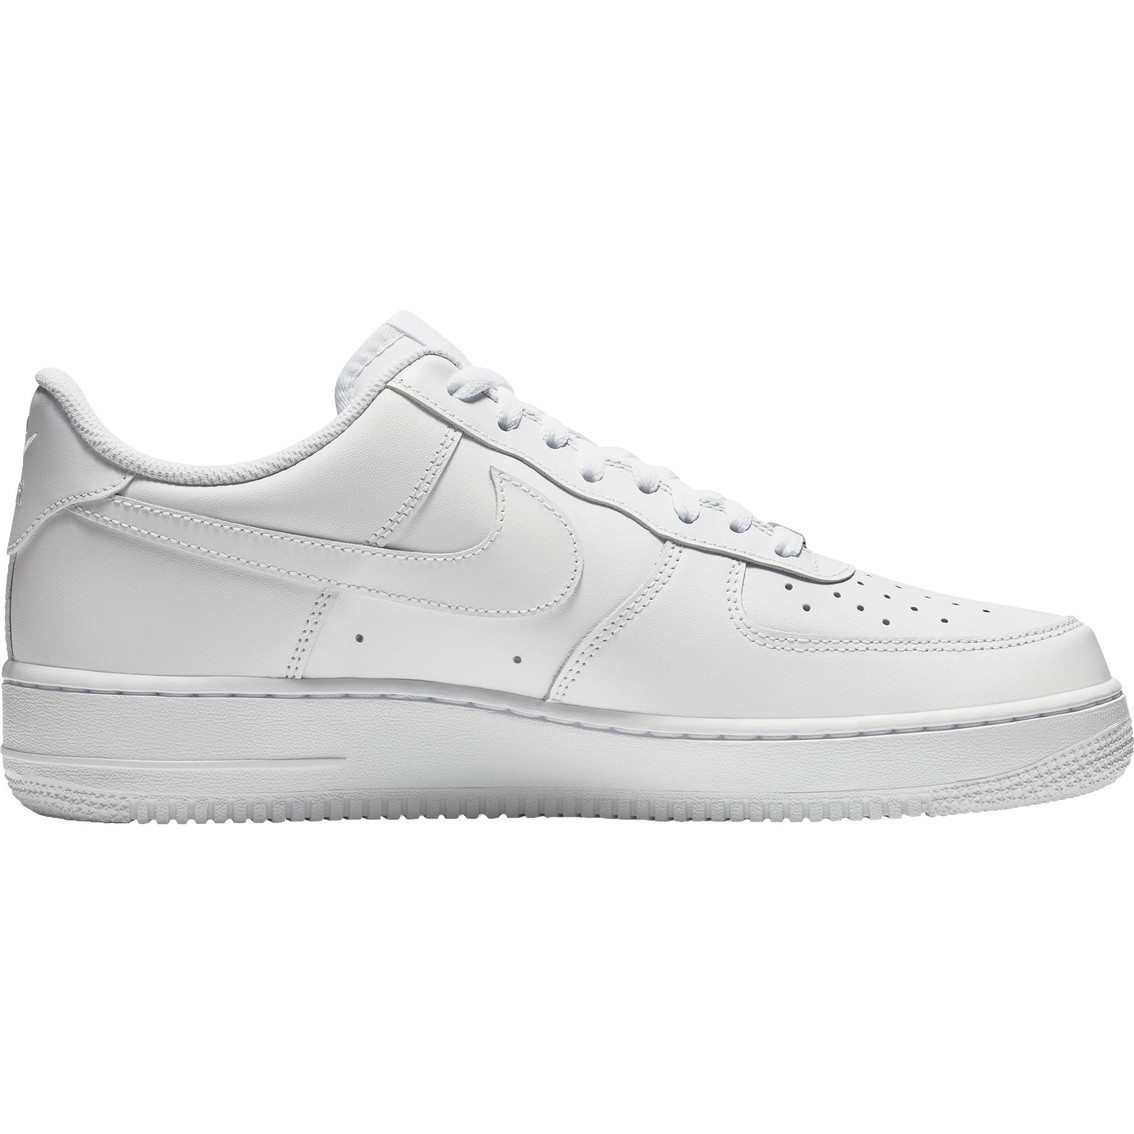 Nike Men's Air Force 1 07 Shoes - Image 7 of 8